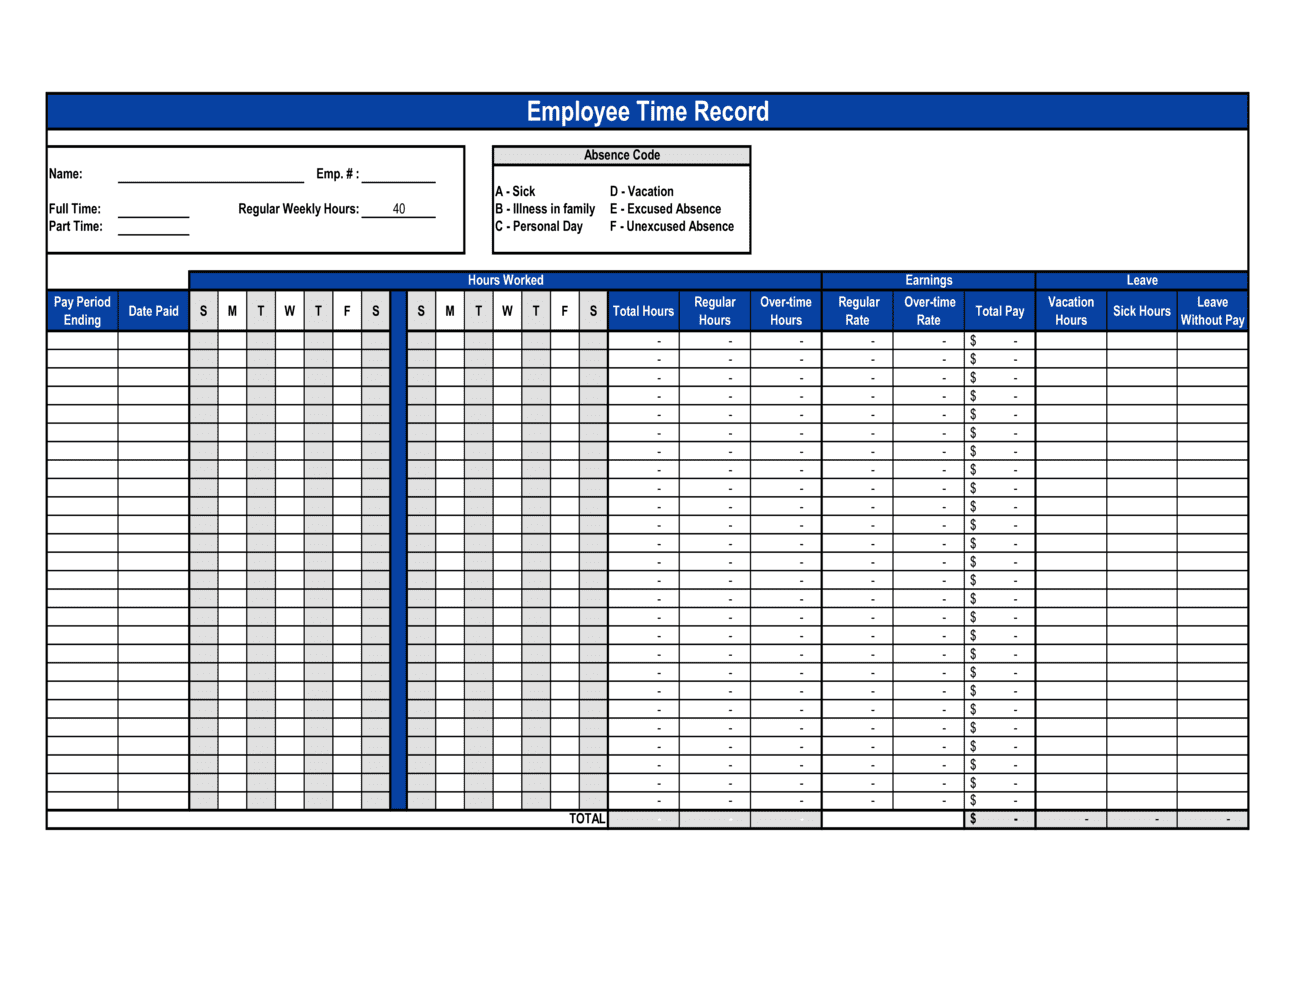 Employee Earnings Record Excel Template from templates.business-in-a-box.com